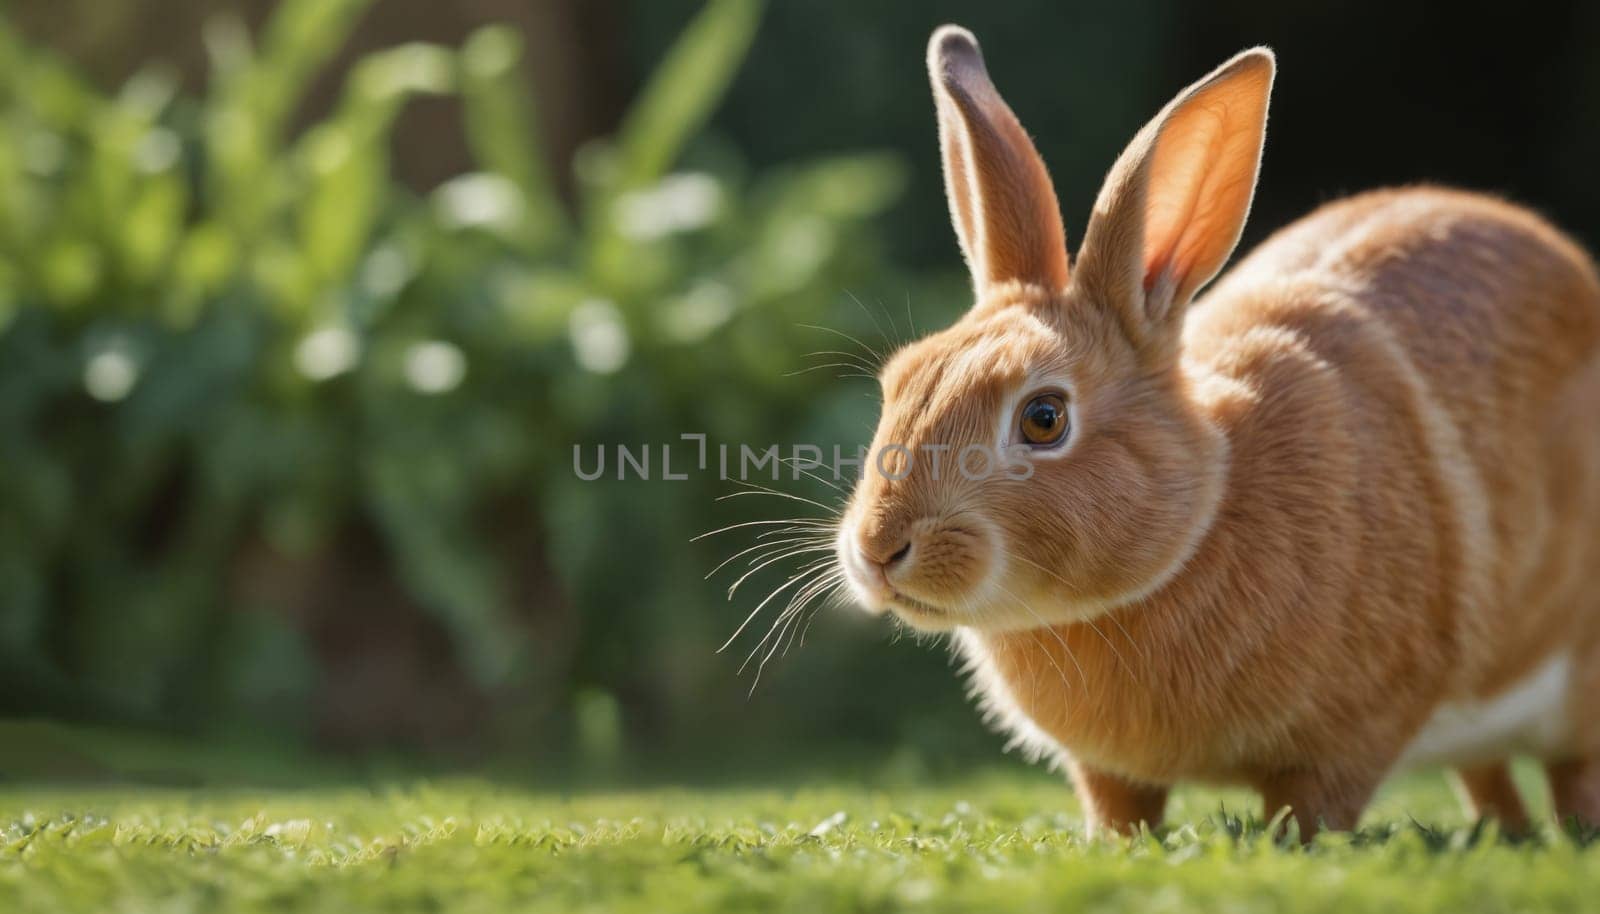 A fluffy brown rabbit with large, expressive eyes stands on a patch of green grass in a sunlit meadow. The rabbit's fur is illuminated by the warm sunlight, and its long, white whiskers twitch slightly. The soft grass and out-of-focus green foliage in the background create a peaceful and idyllic scene.